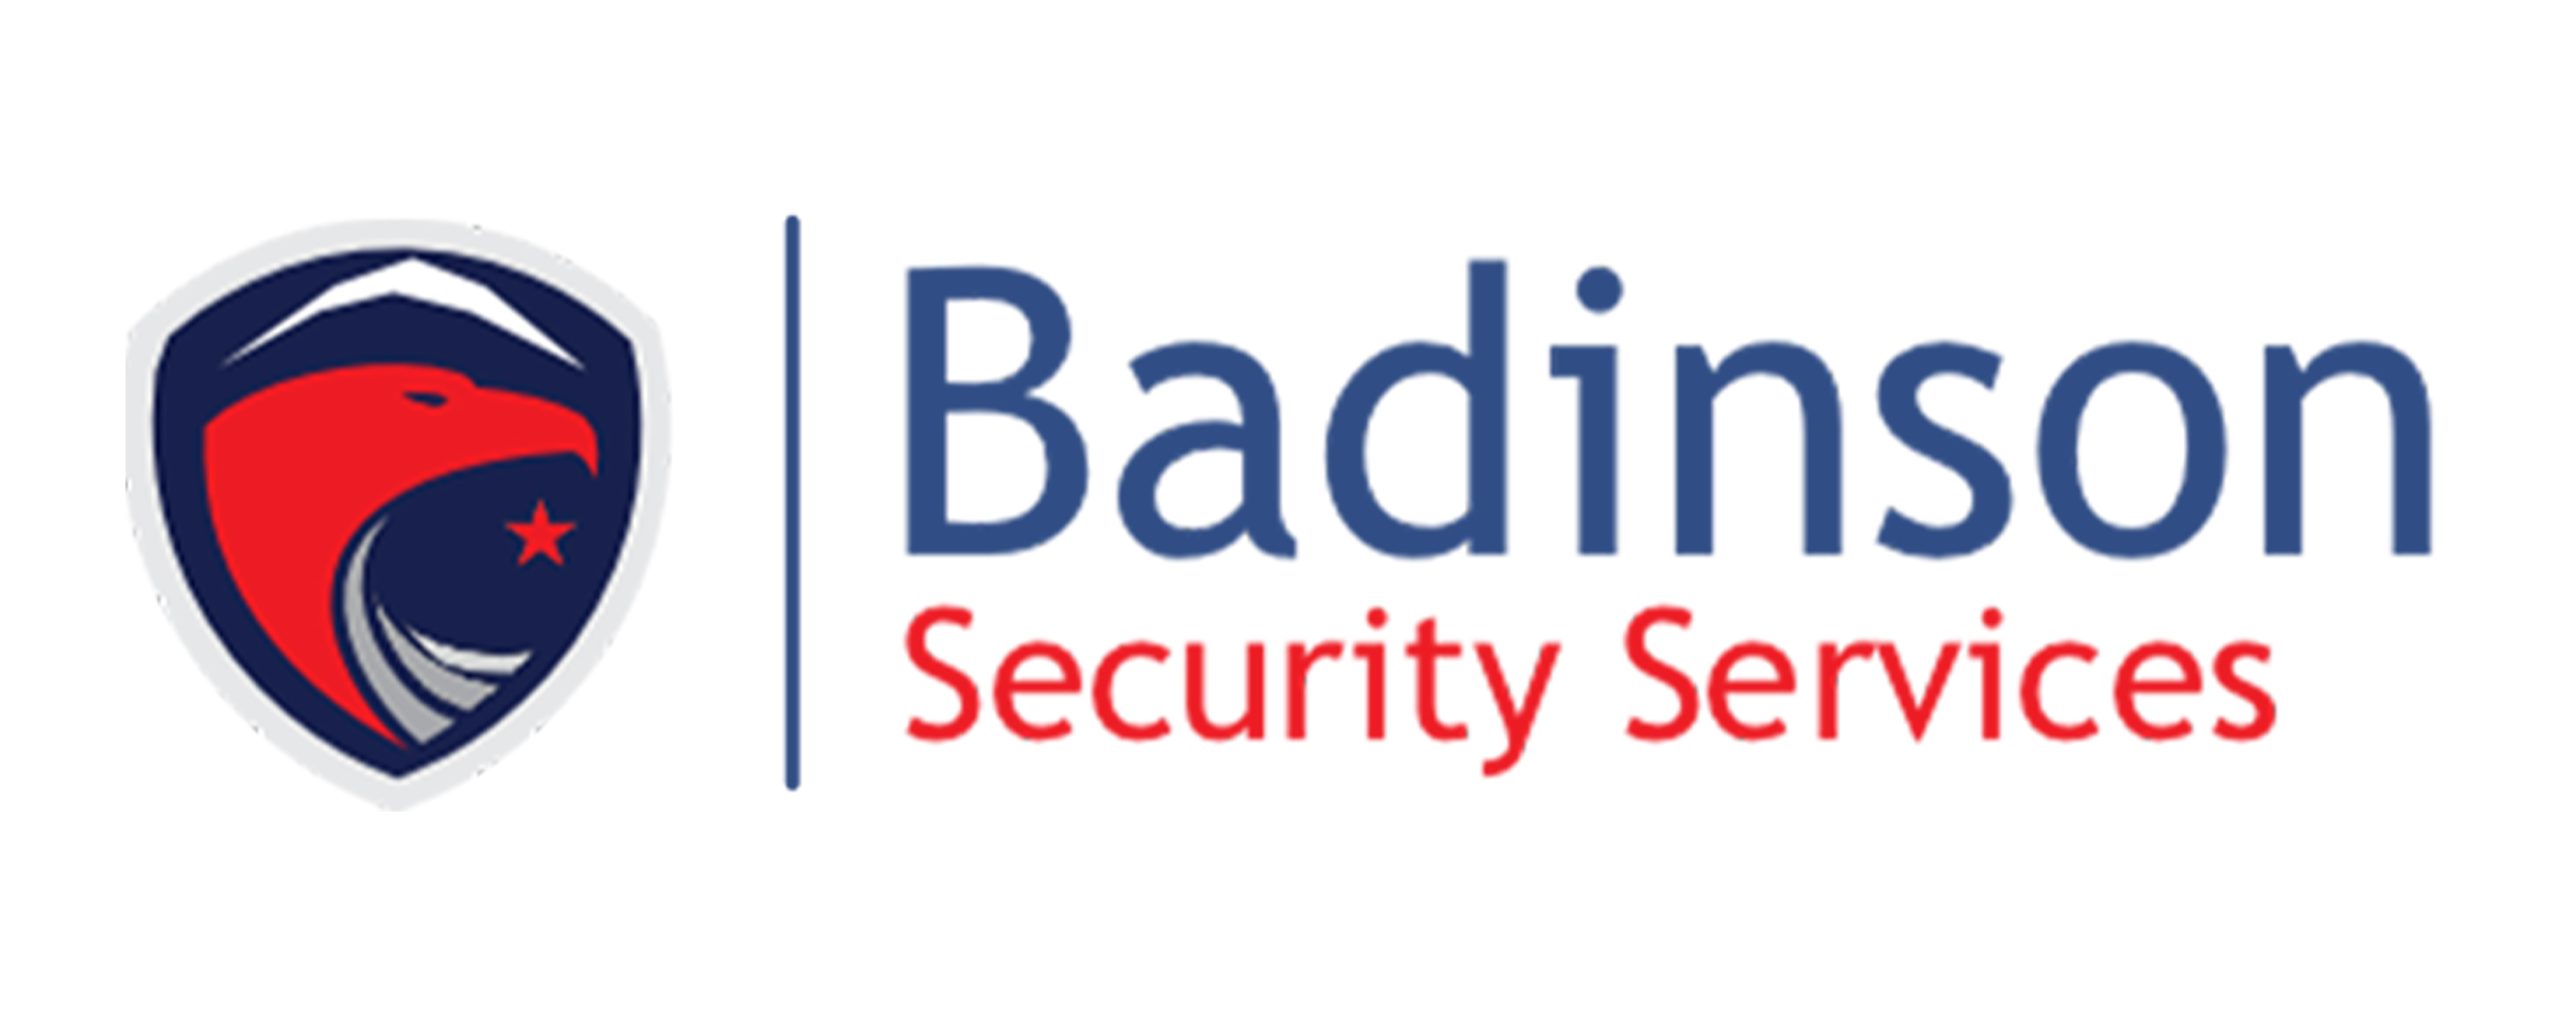 BADINSON SECURITY SERVICES LIMITED